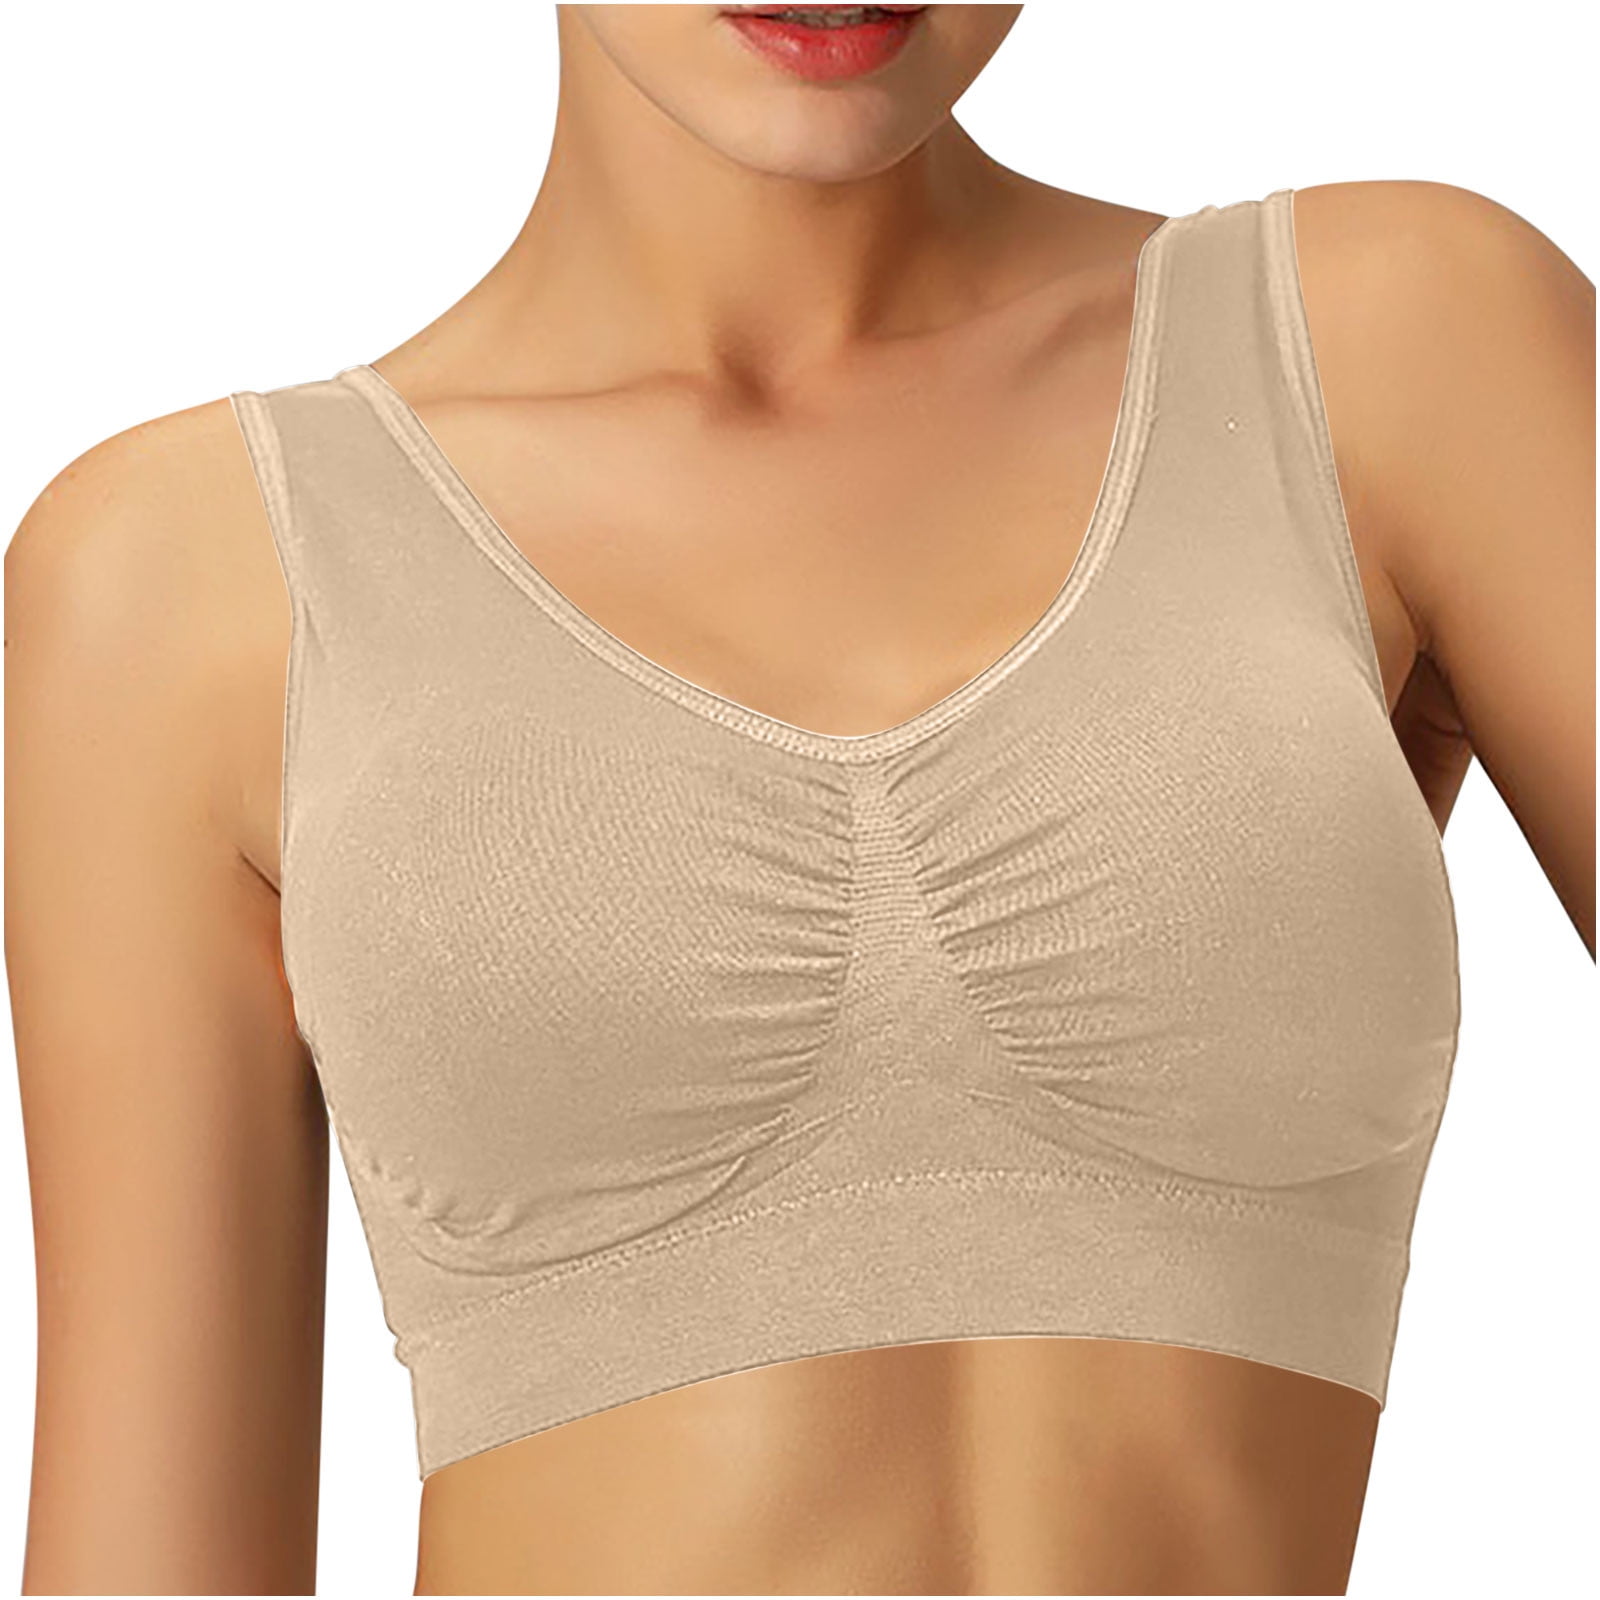 Mrat Clearance Front Closure Bras for Women Front Snap Small Breasted  Sports Bras Pack Lace with Support Reusable Sports Bras Large Bust Seamless  Womens Sports Bras Beige XL 